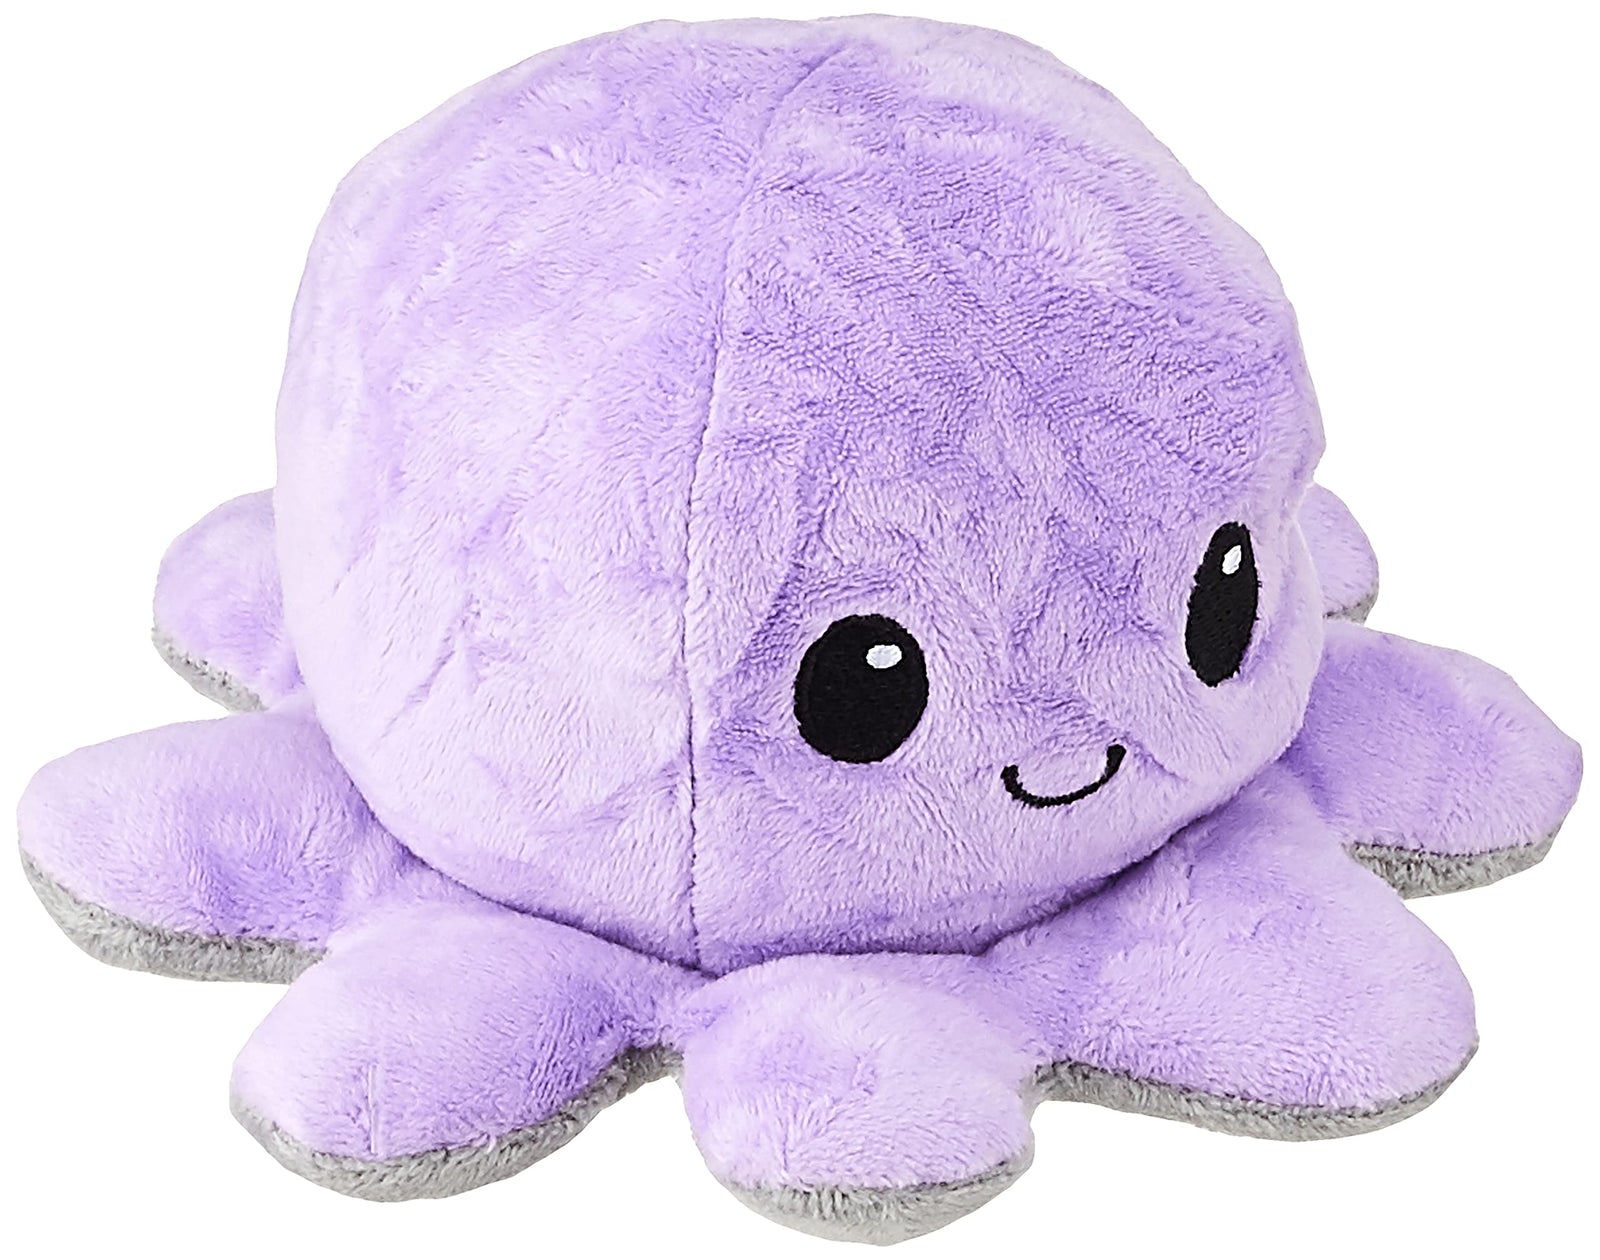 TeeTurtle | The Original Reversible Octopus Plushie | Patented Design | Light Pink + Light Blue | Happy + Angry | Show your mood without saying a word!